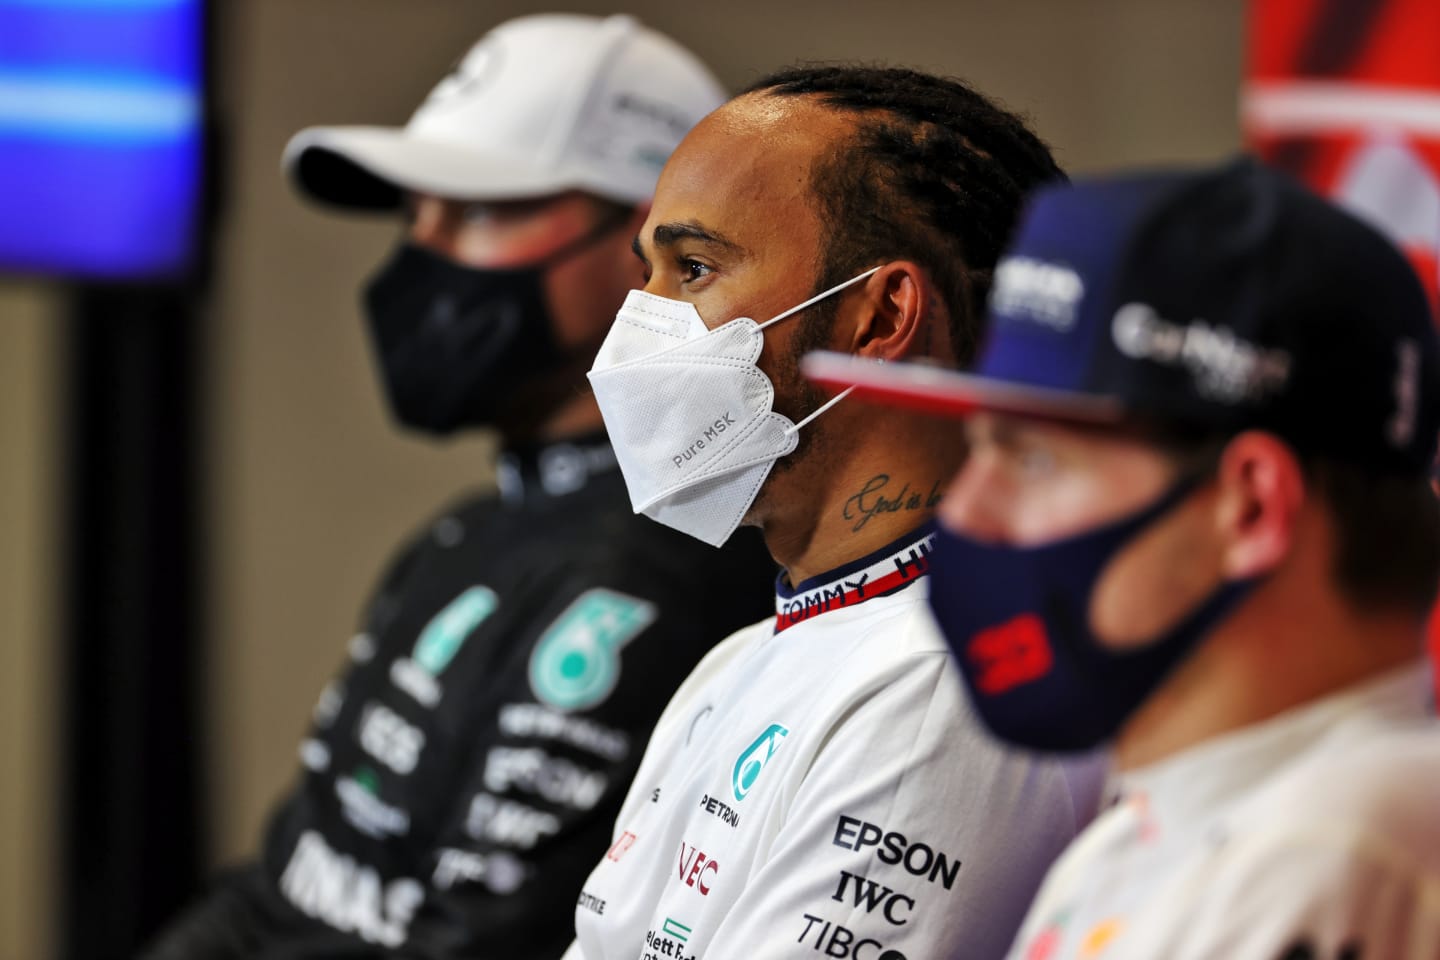 ISTANBUL, TURKEY - OCTOBER 09: Pole position qualifier Lewis Hamilton of Great Britain and Mercedes